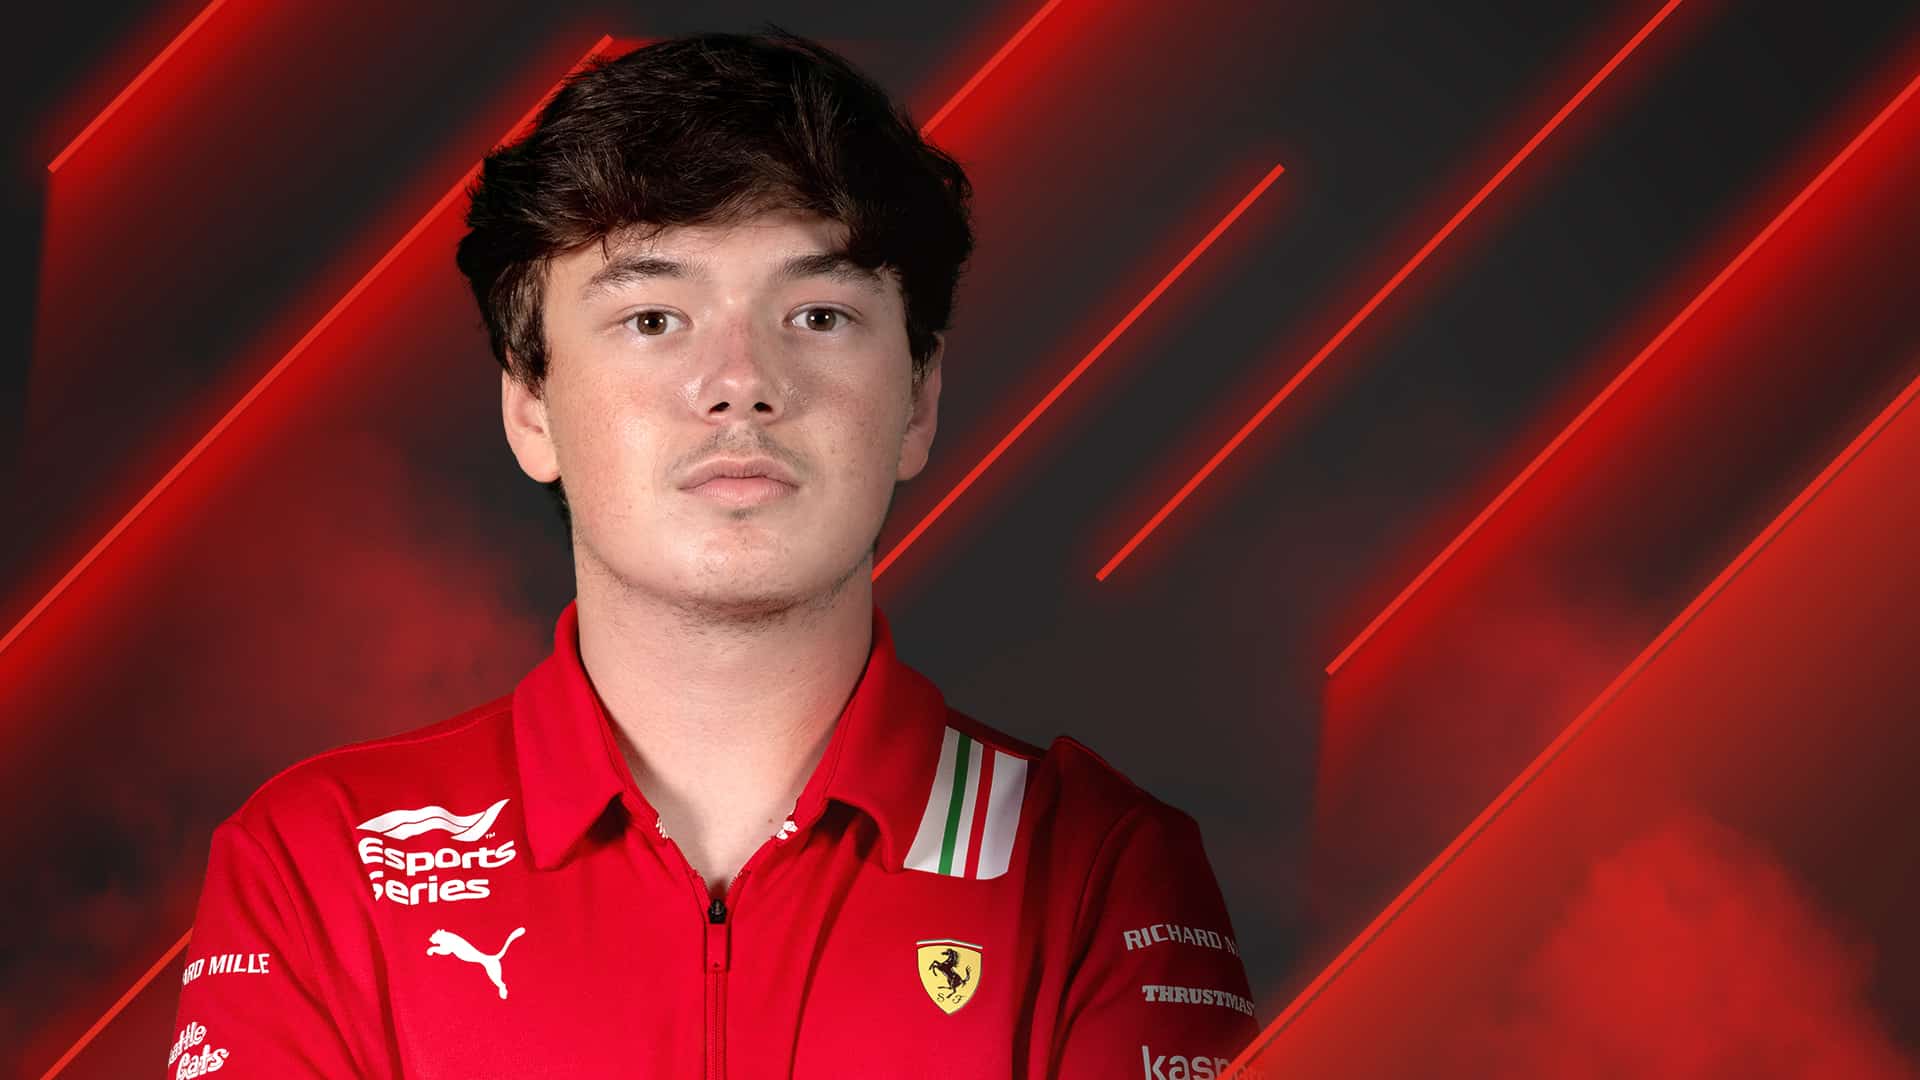 F1 Esports Pro Why Brendon Leigh is so content at Ferrari